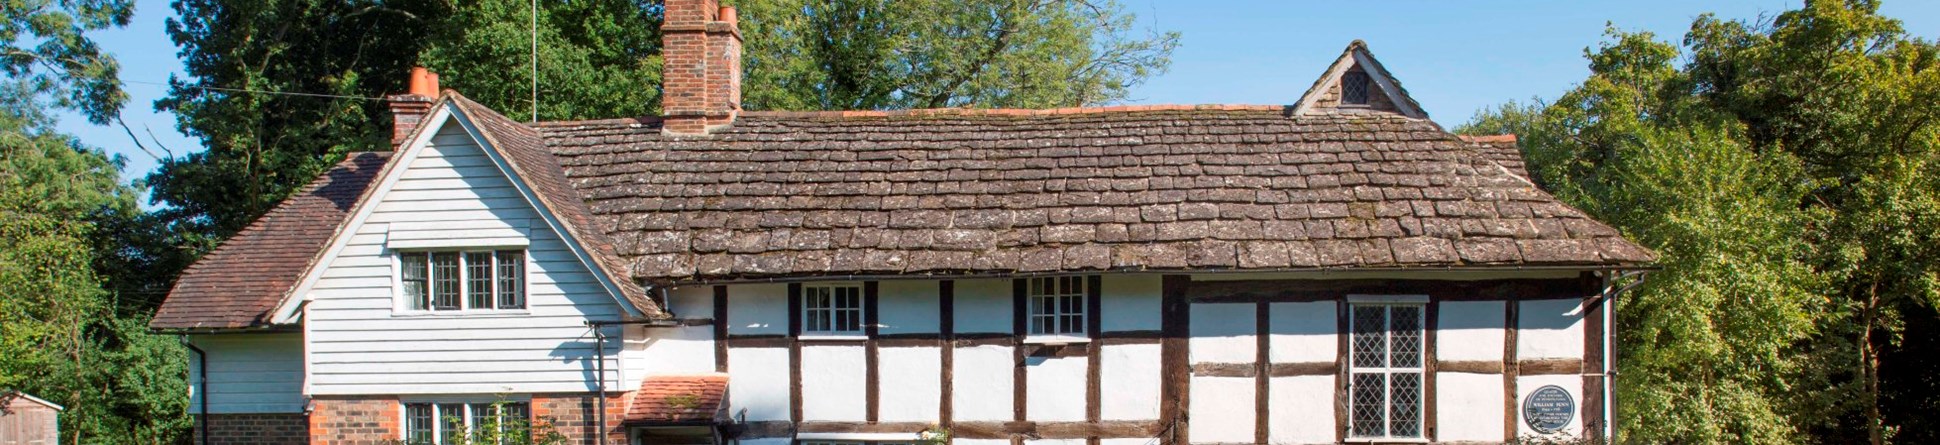 Blue Idol Quaker Meeting House, West Sussex, view from west showing timber-framed soulth range and weather-boarded west-facing gable above later brick bay.